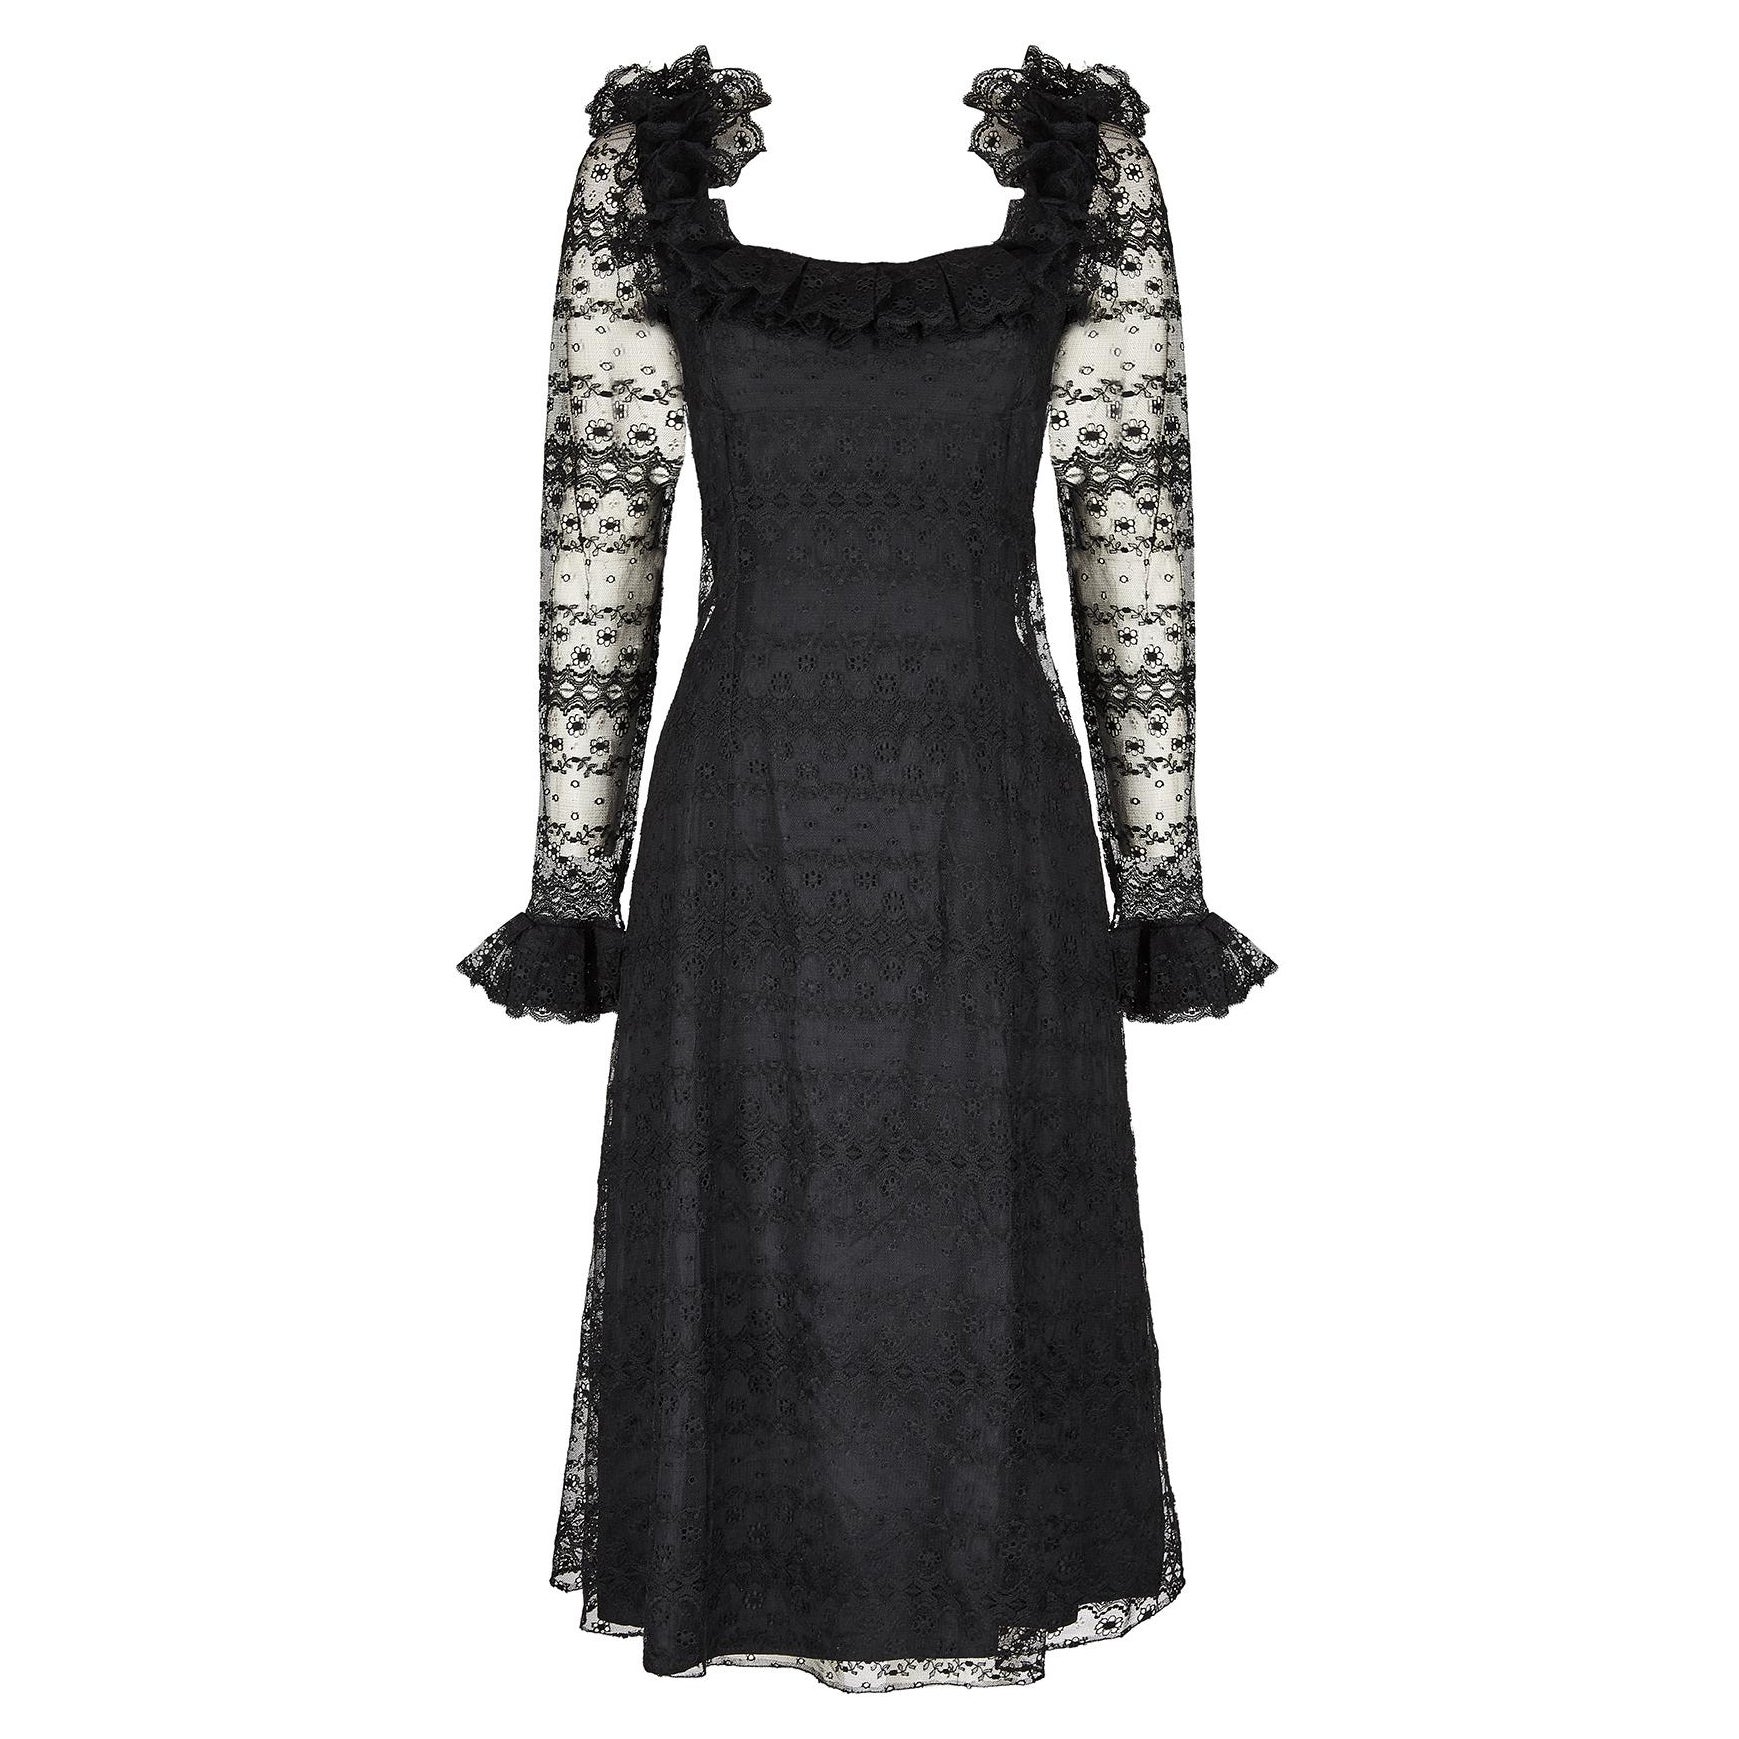 1971 Documented Madame Gres Haute Couture Black Lace Dress For Sale